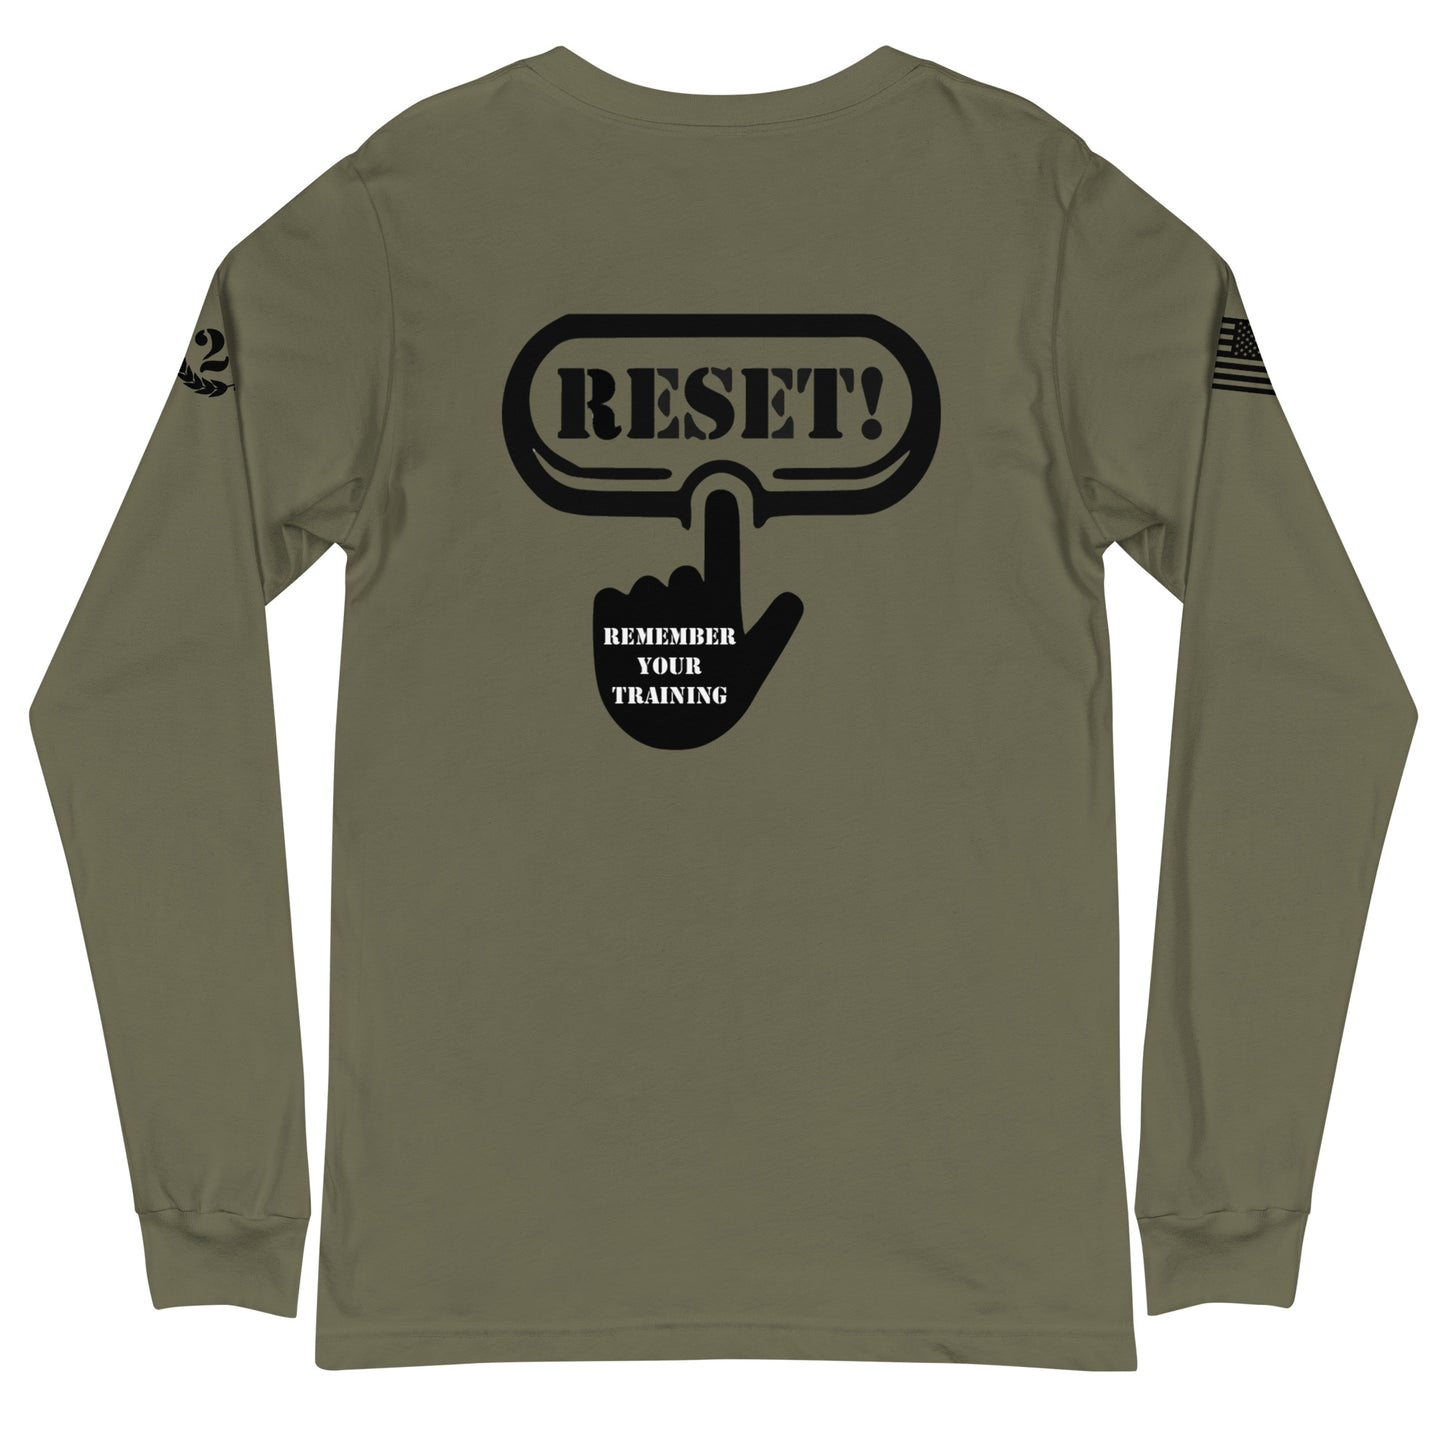 Remember Your Training and Reset, Long Sleeve Tee